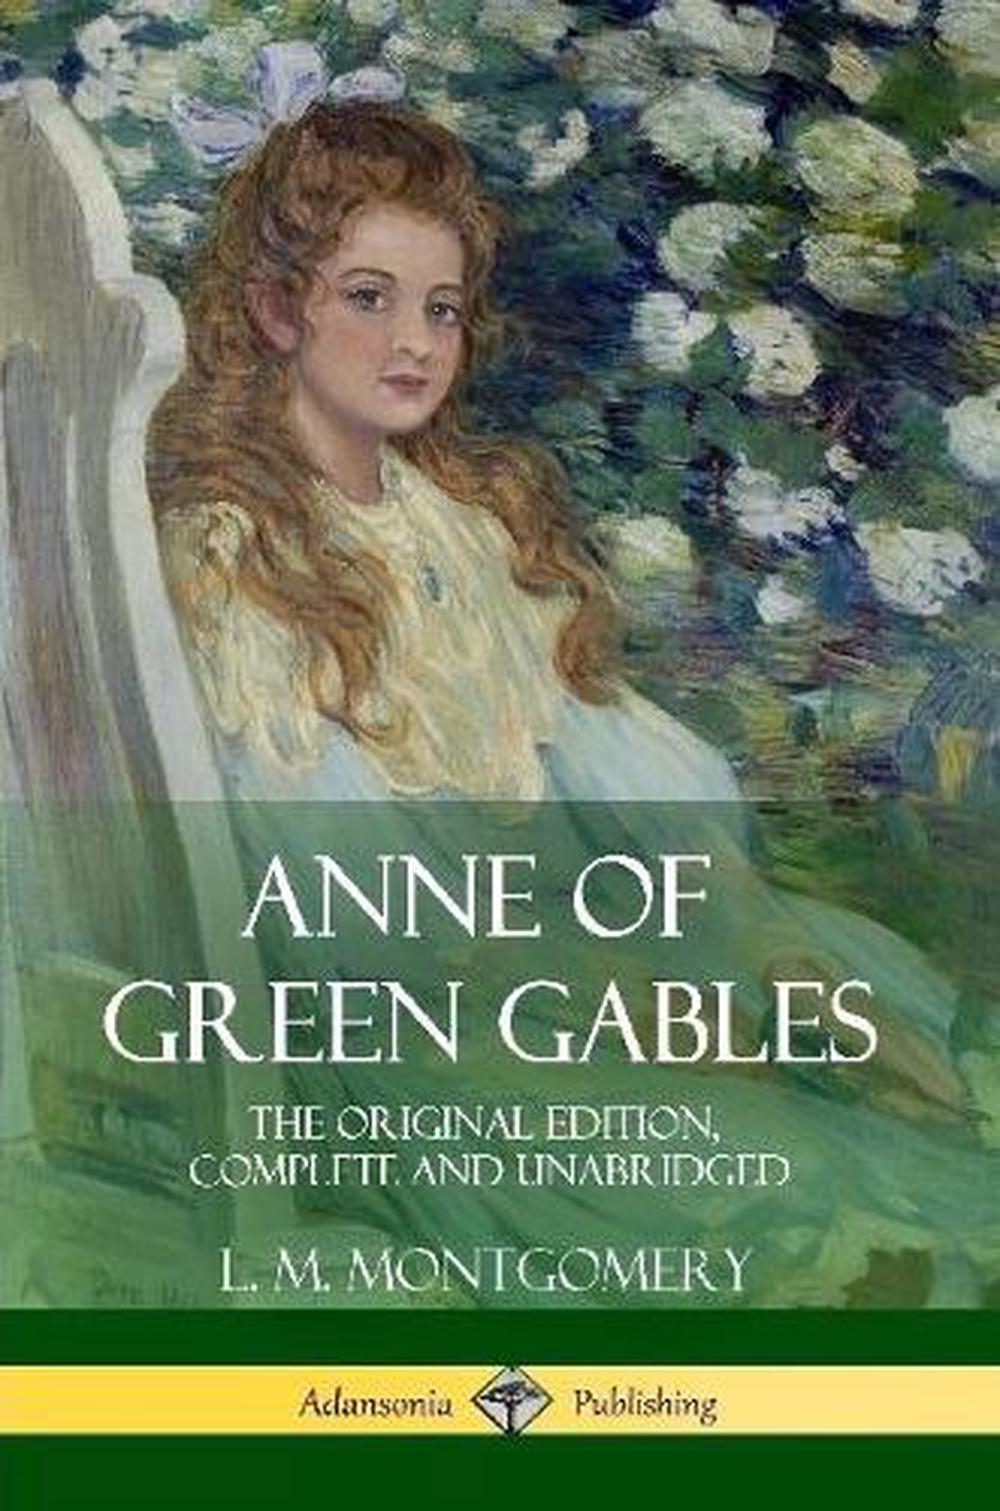 book review of anne of green gables